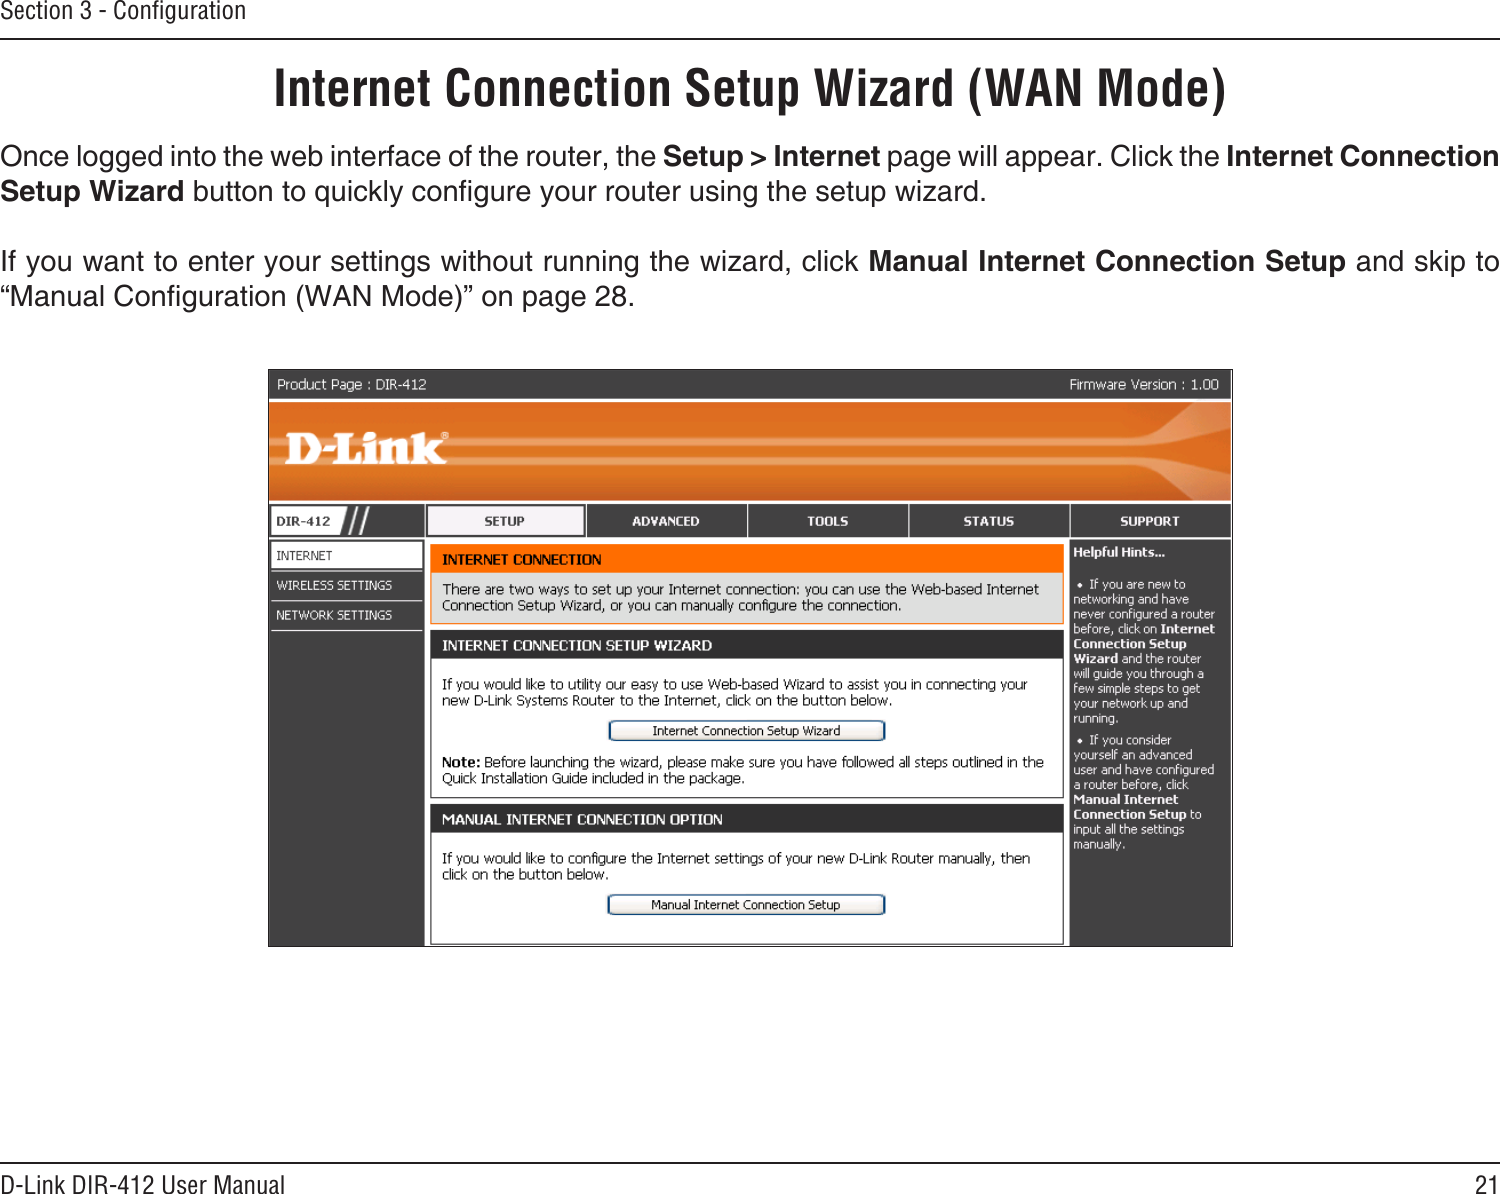 21D-Link DIR-412 User ManualSection 3 - ConﬁgurationInternet Connection Setup Wizard (WAN Mode)Once logged into the web interface of the router, the Setup &gt; Internet page will appear. Click the Internet Connection Setup Wizard button to quickly congure your router using the setup wizard.If you want to enter your settings without running the wizard, click Manual Internet Connection Setup and skip to “Manual Conguration (WAN Mode)” on page 28.